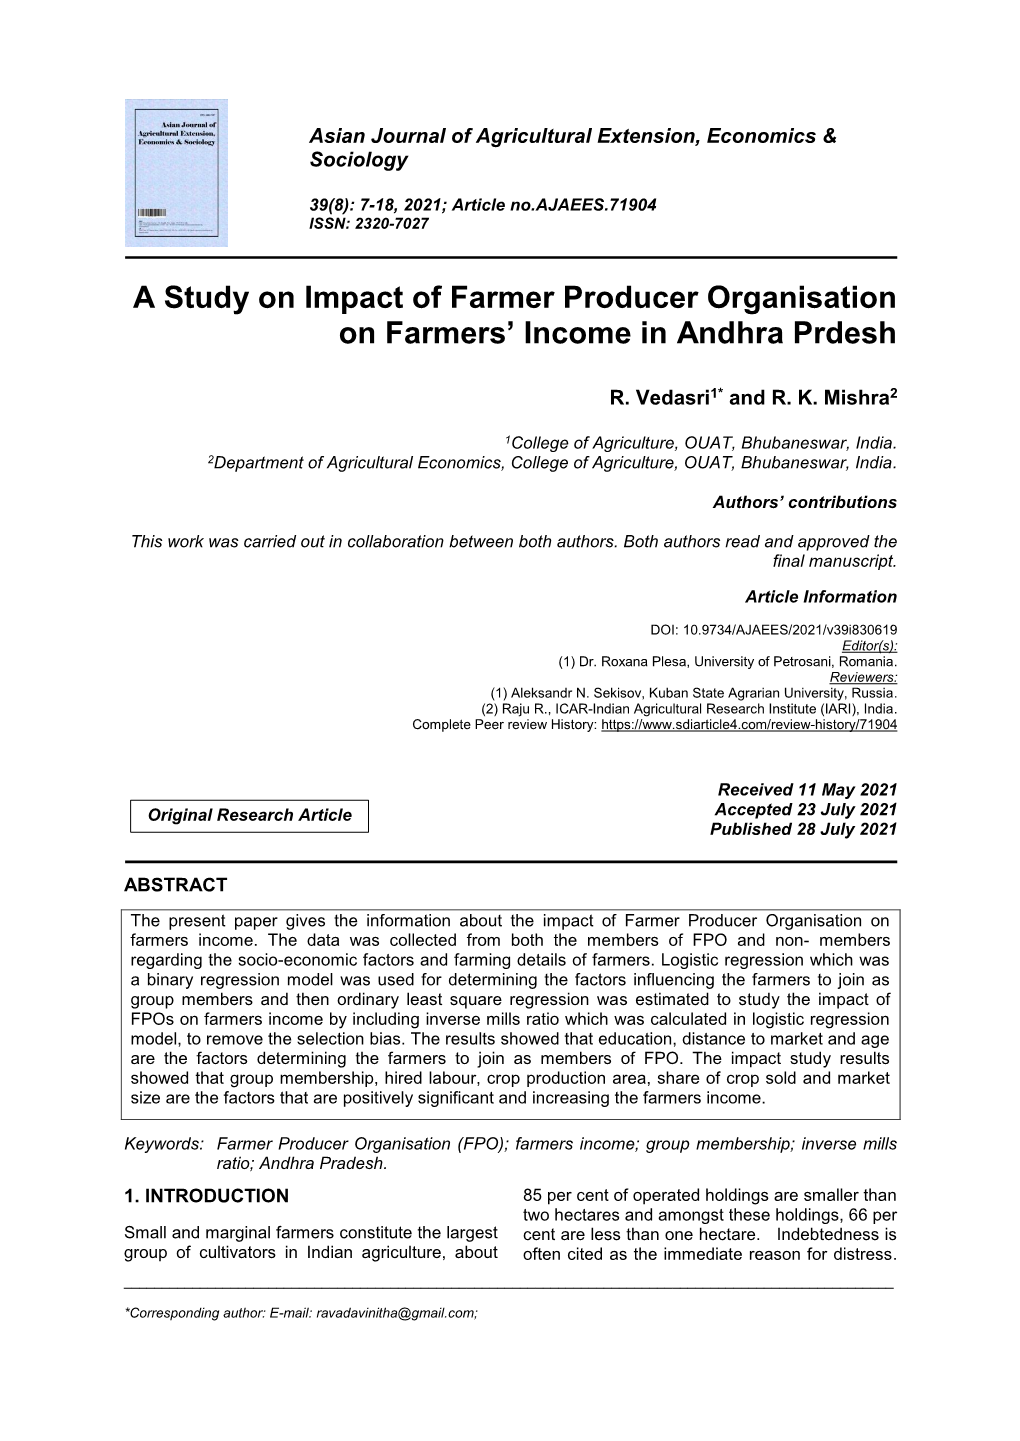 A Study on Impact of Farmer Producer Organisation on Farmers' Income In